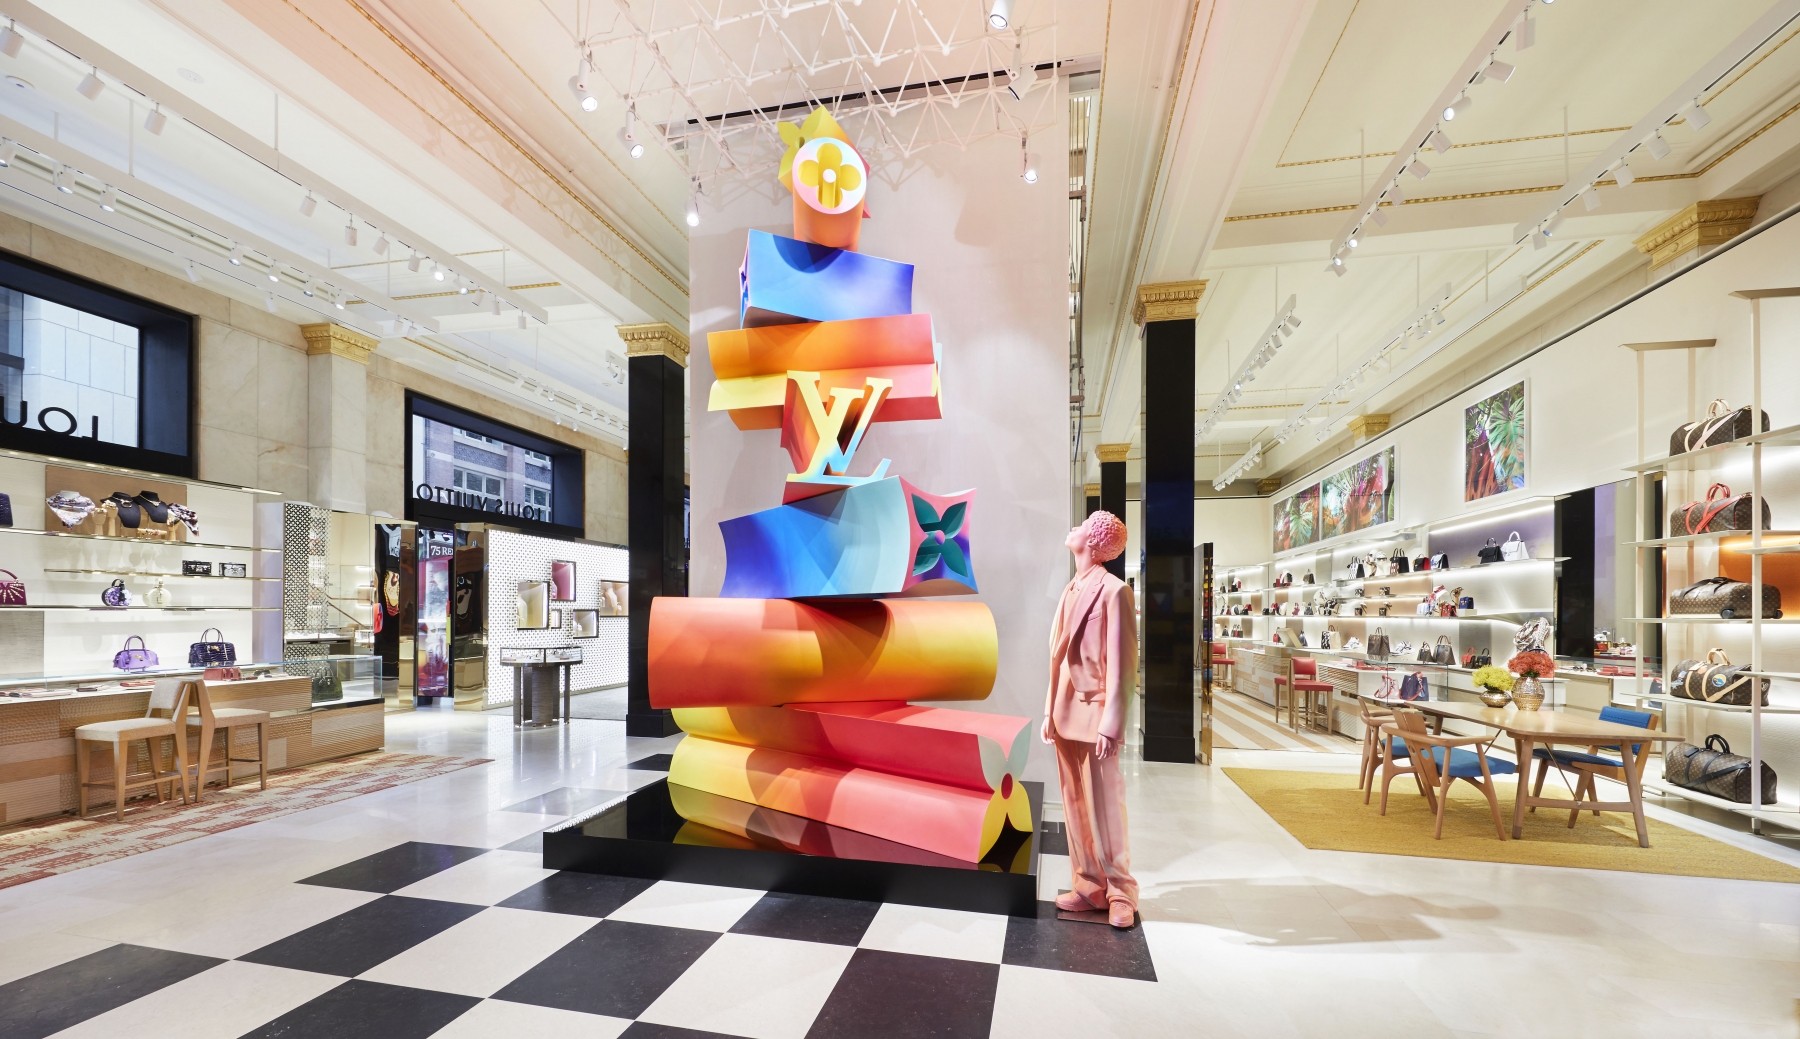 The newly renovated Louis Vuitton store